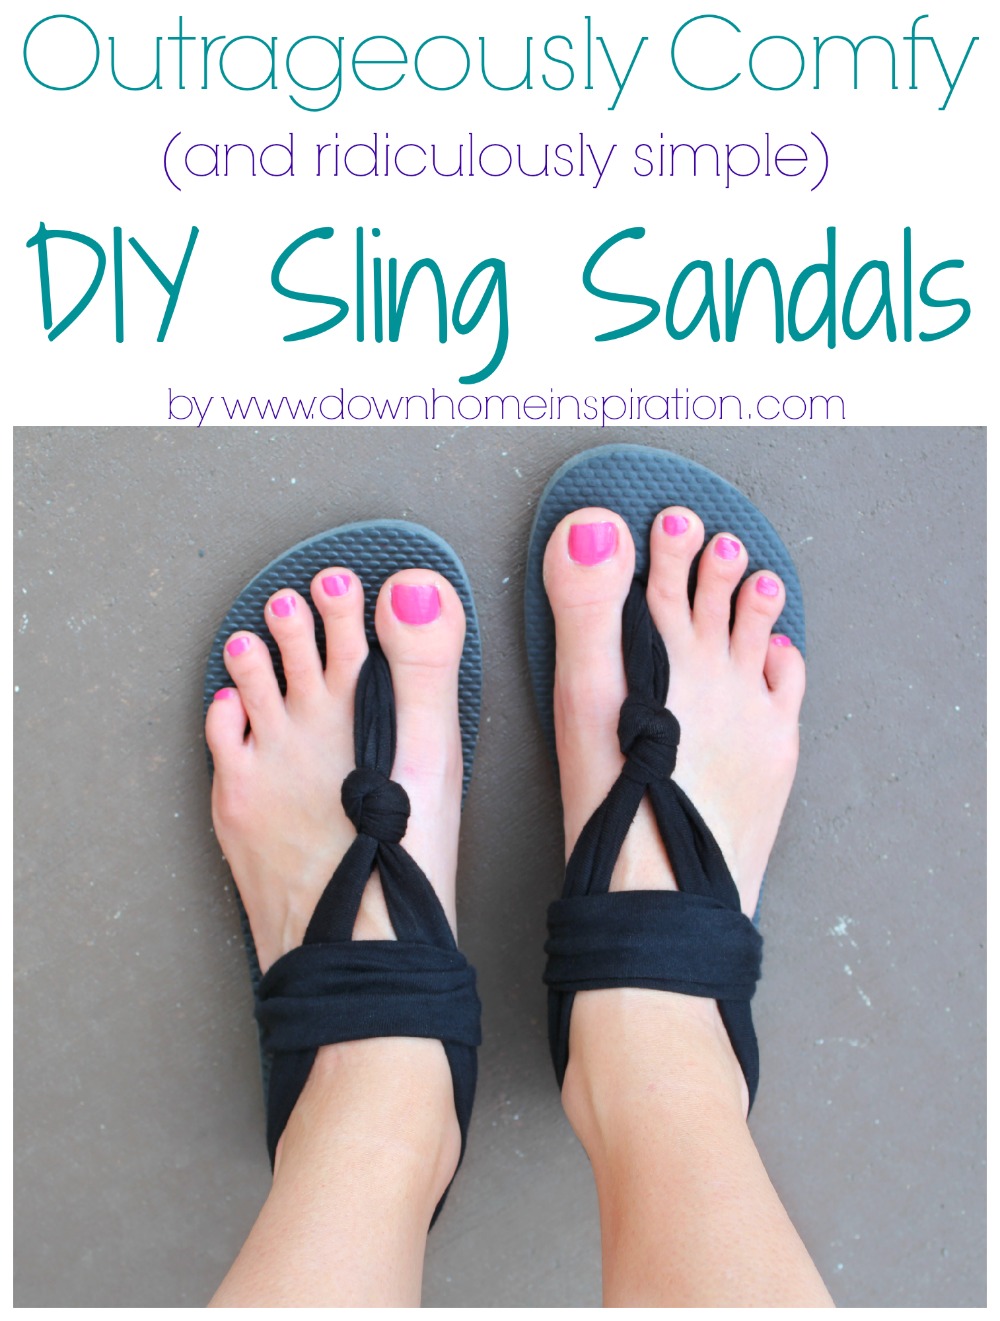 ridiculously simple) DIY Sling Sandals 